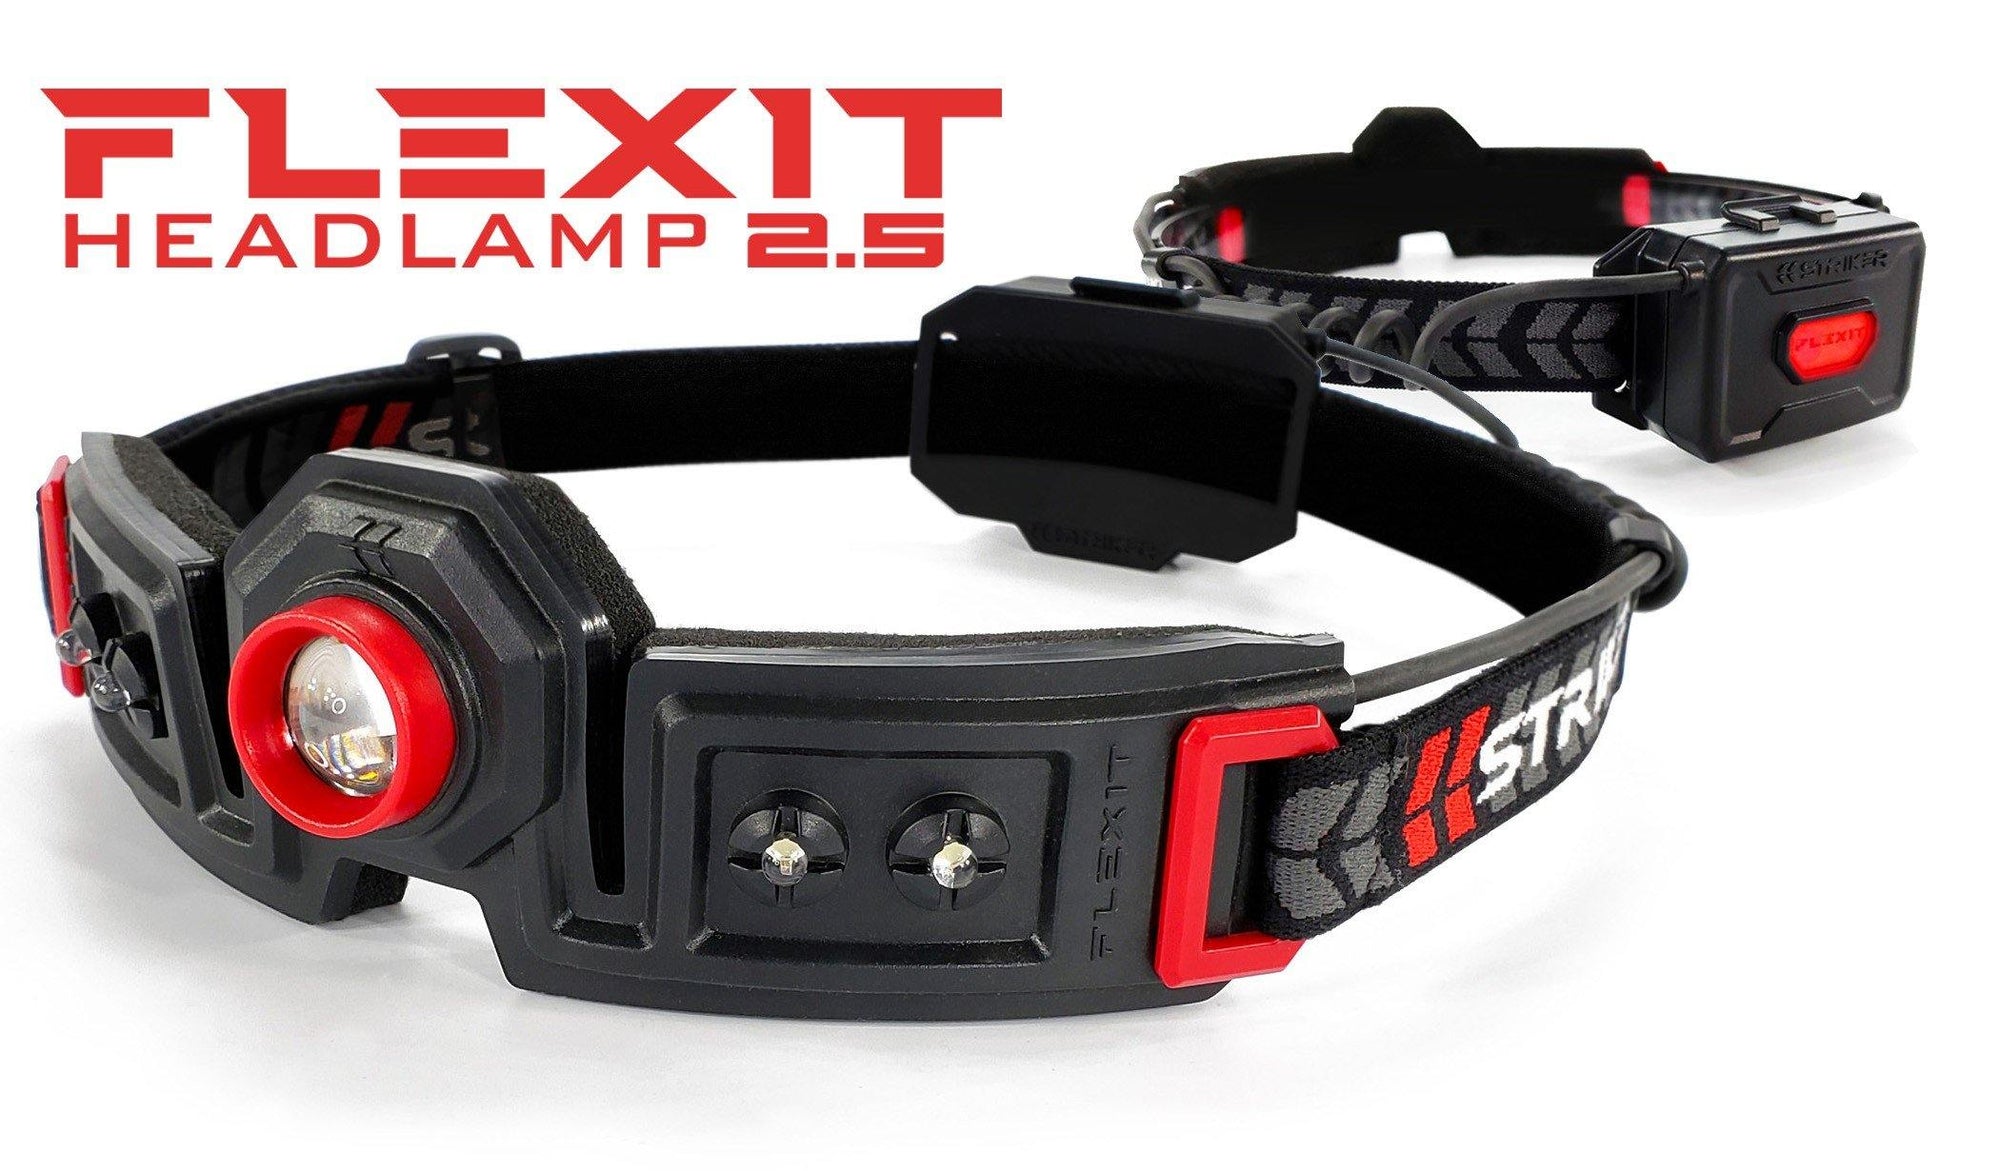 The STKR® FLEXIT Headlamp 2.5 Hands-Free “HALO” Lighting with Comfort STKR Concepts